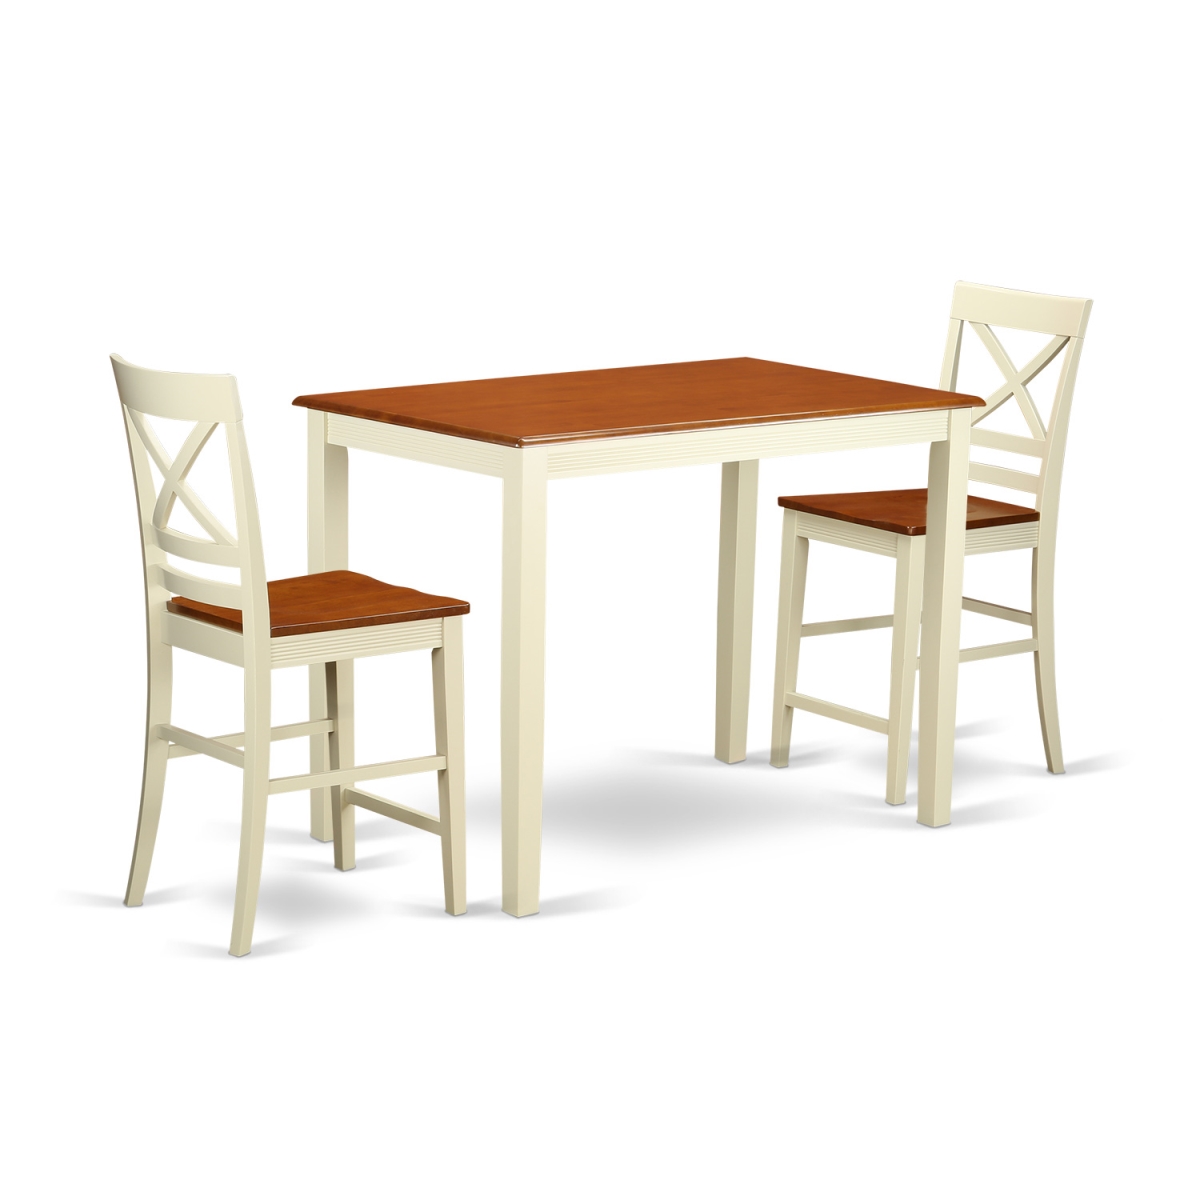 Counter Height Pub Table & 2 Chairs, White Finish